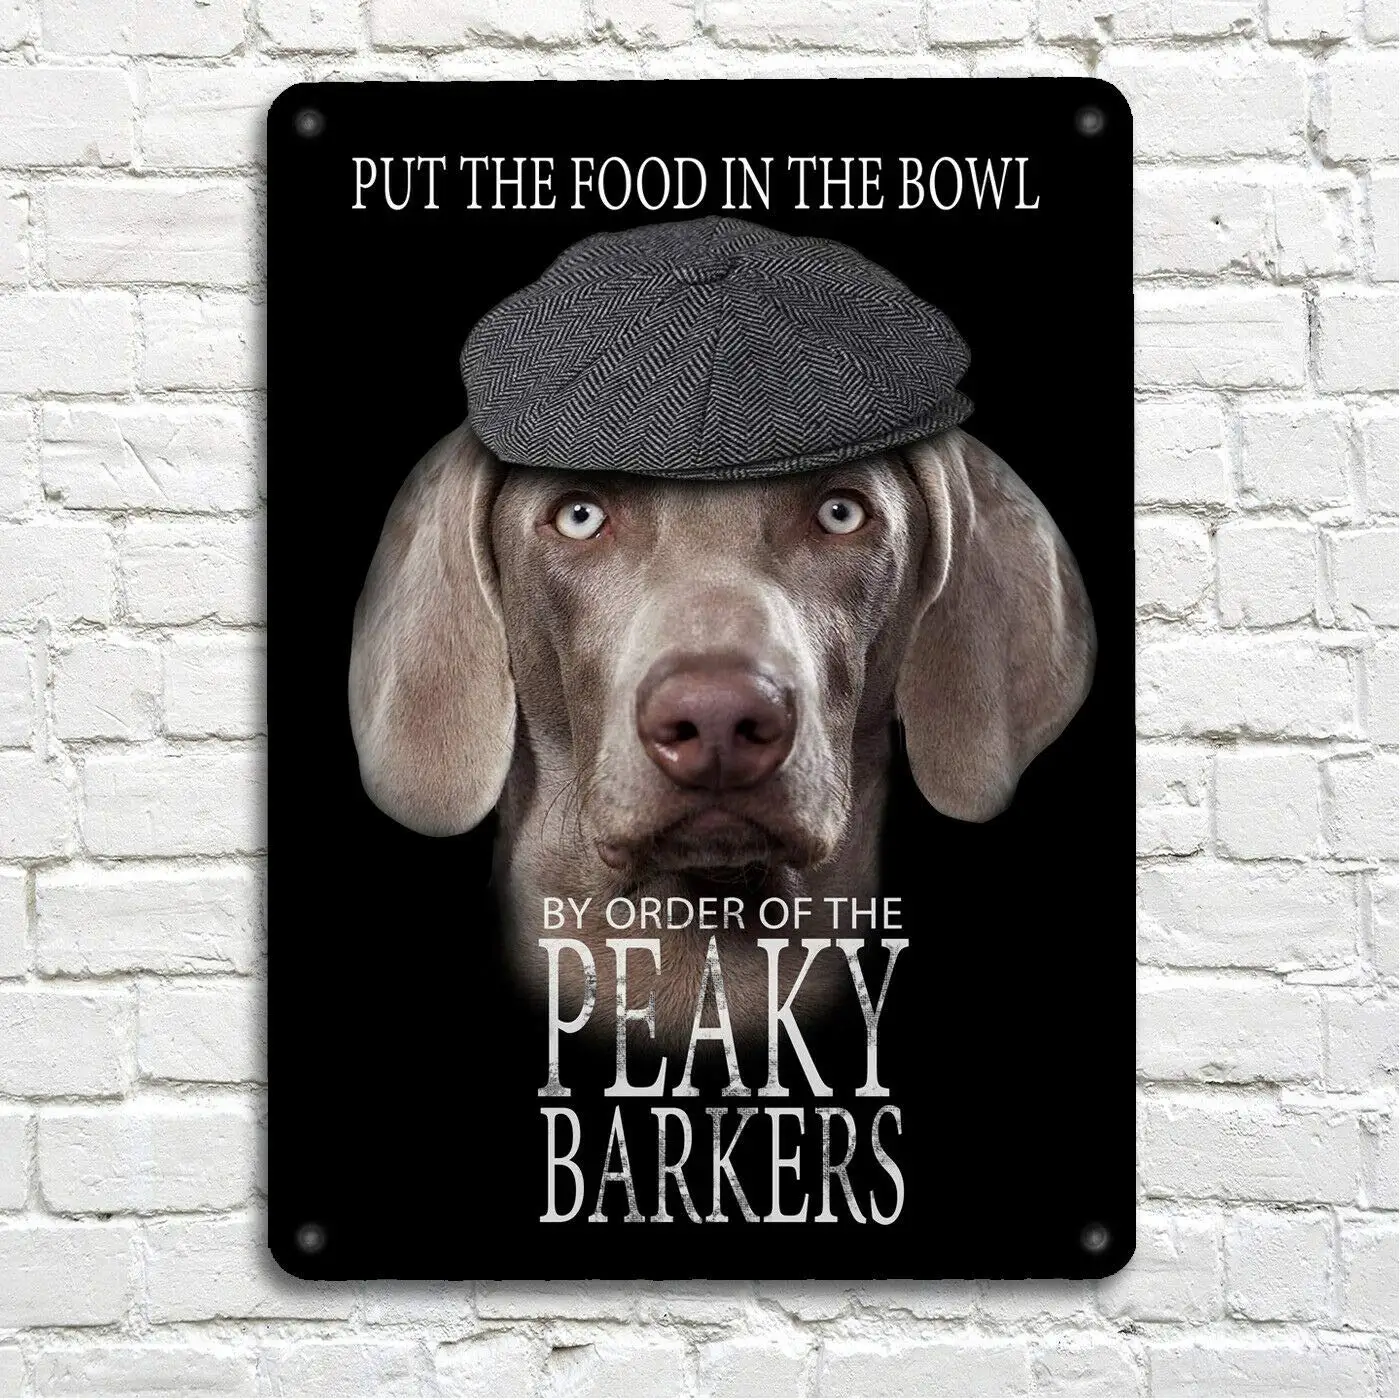 PP2471 WARNING AREA PATROLLED BY WEIMARANER Plate Chic Sign Home Decor 